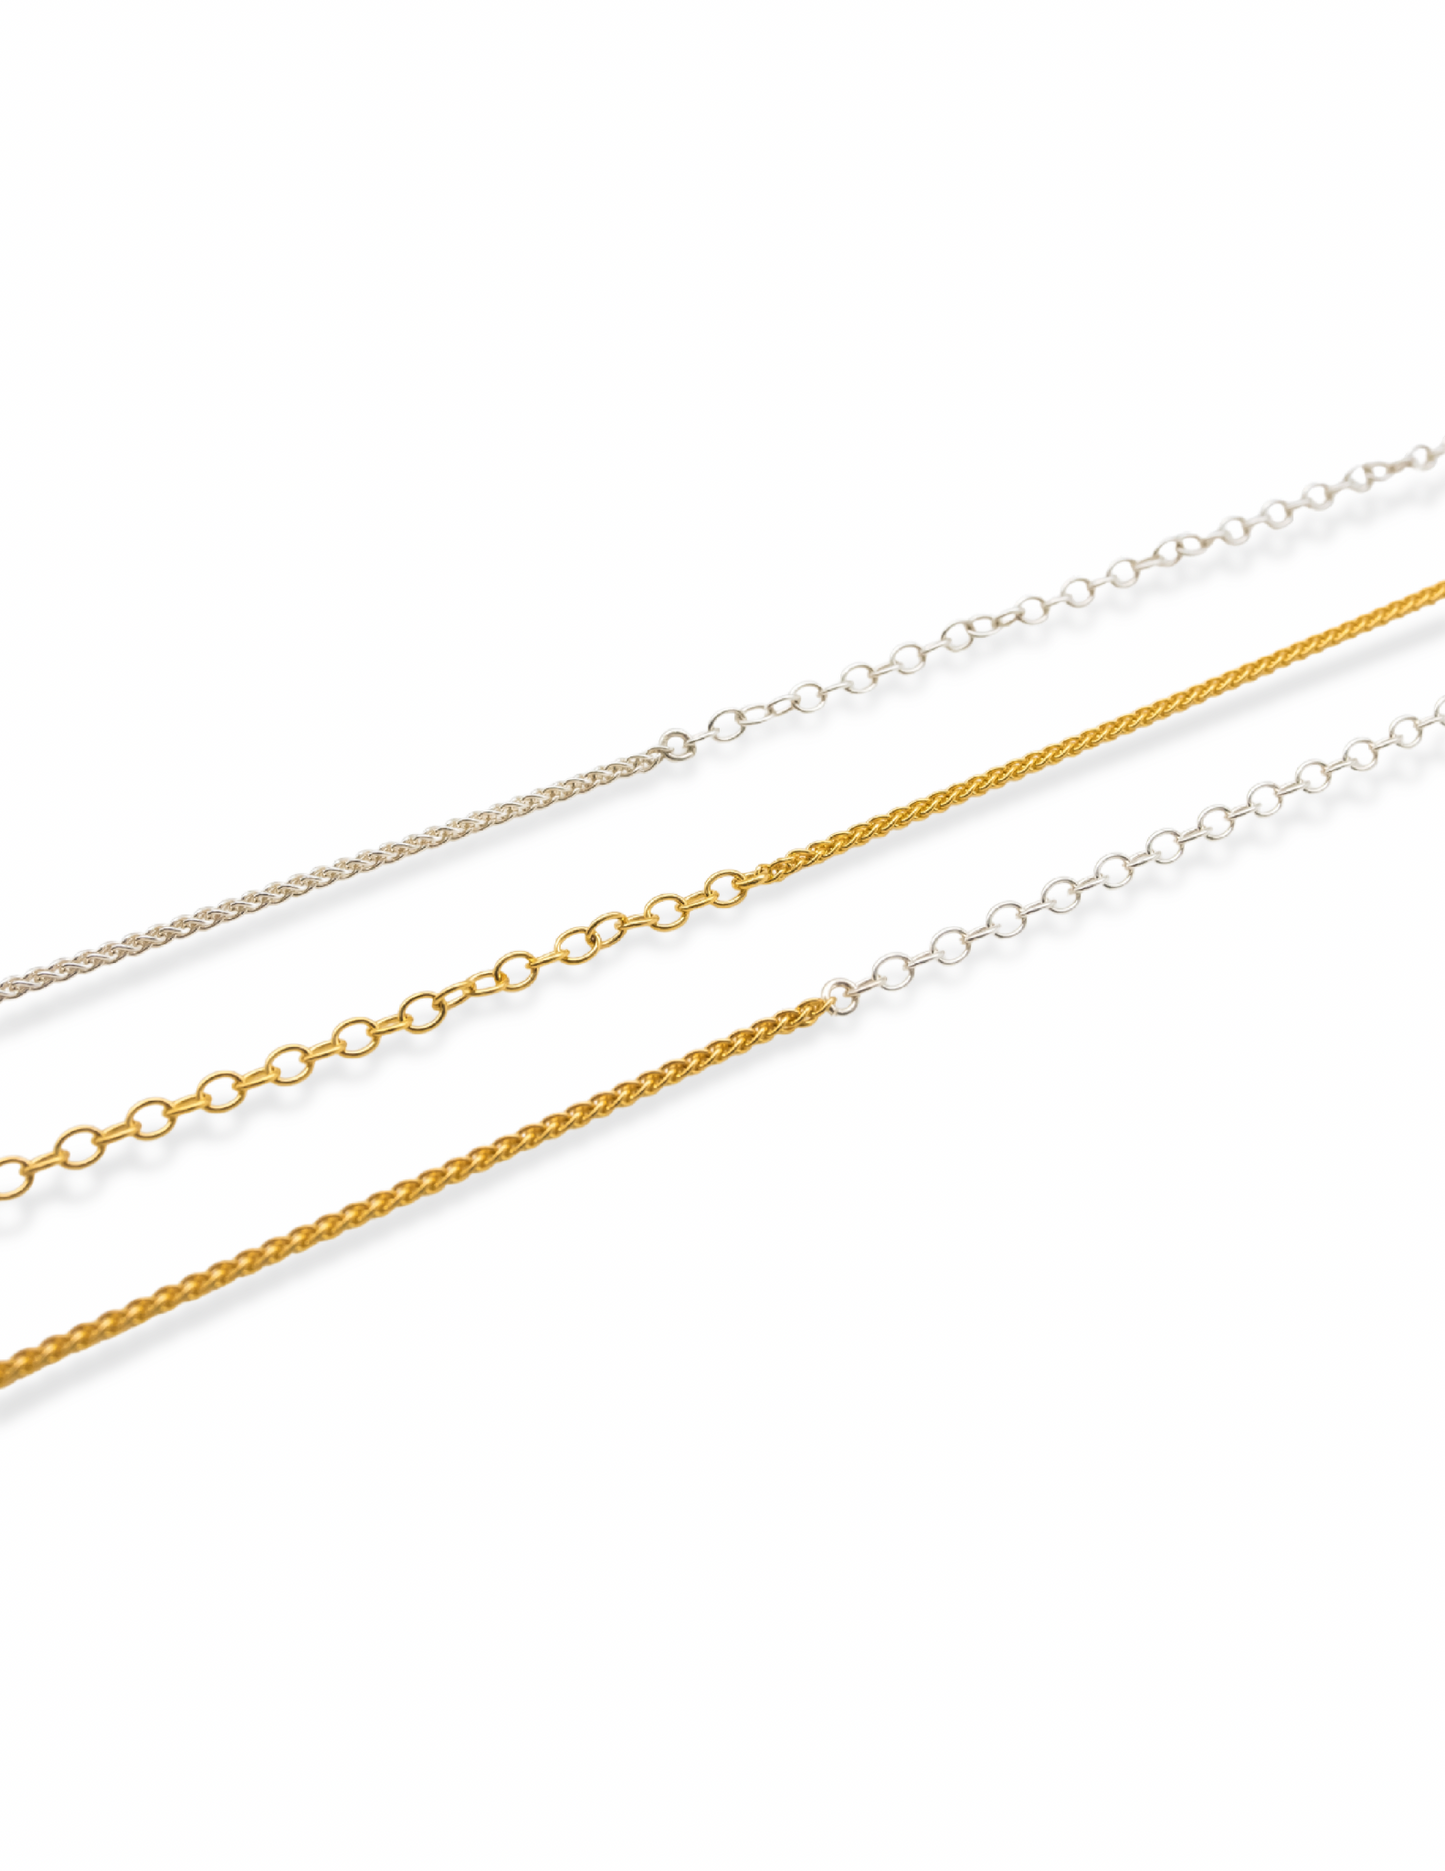 Kharys jewelry two tone double chain necklace in sterling silver and 18k gold vermeil